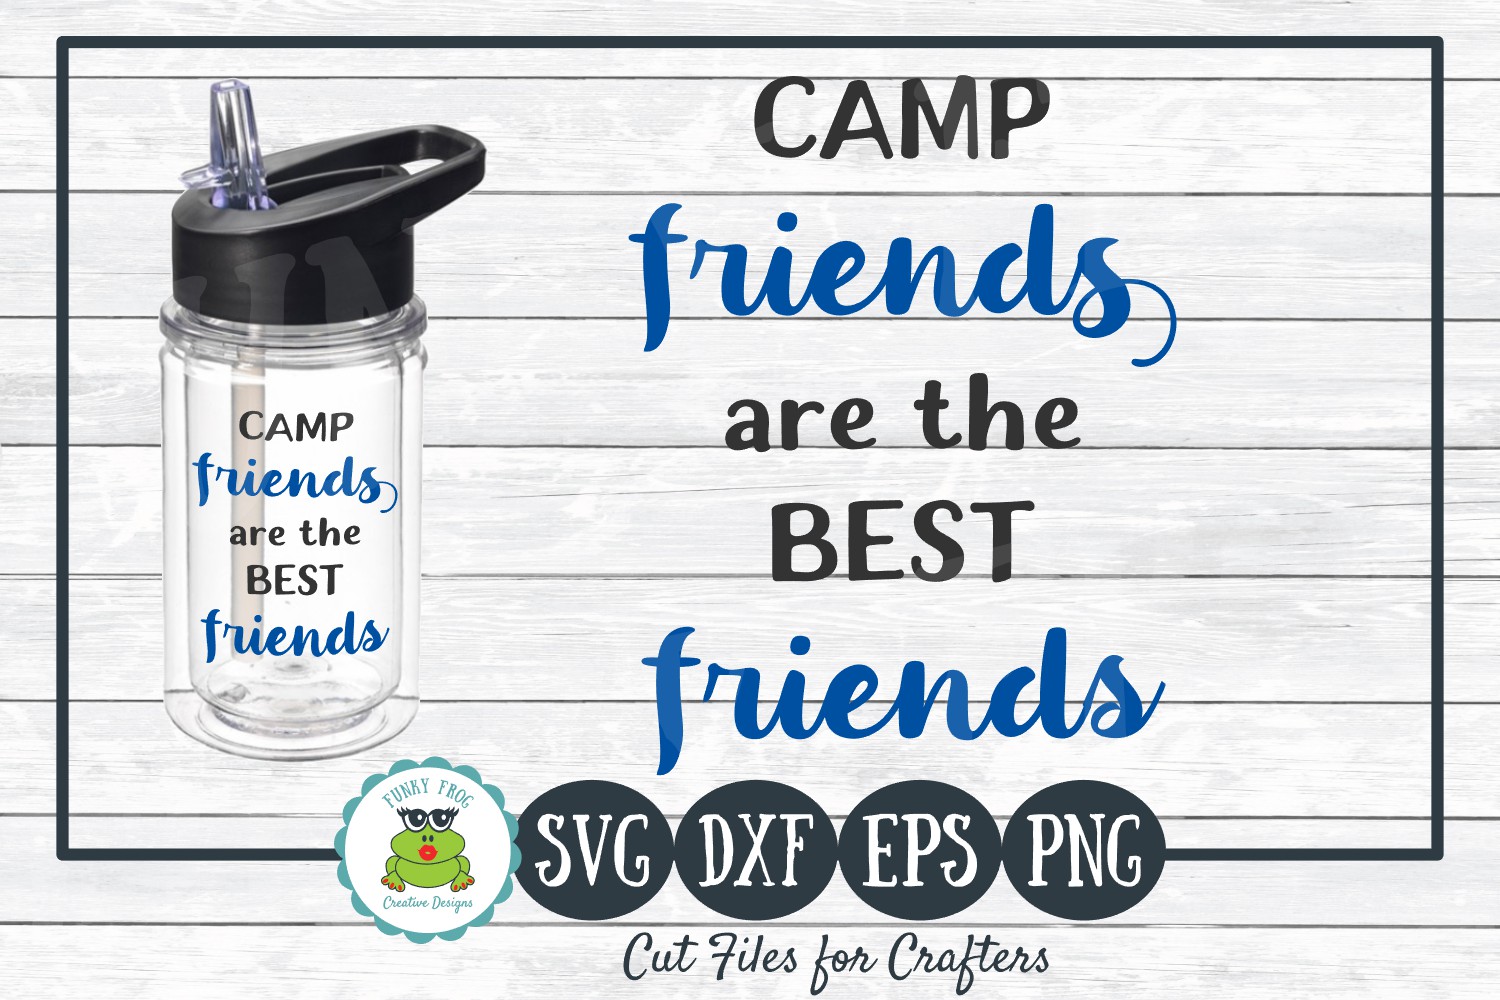 Download Camp Friends are the Best Friends, SVG Cut File for ...